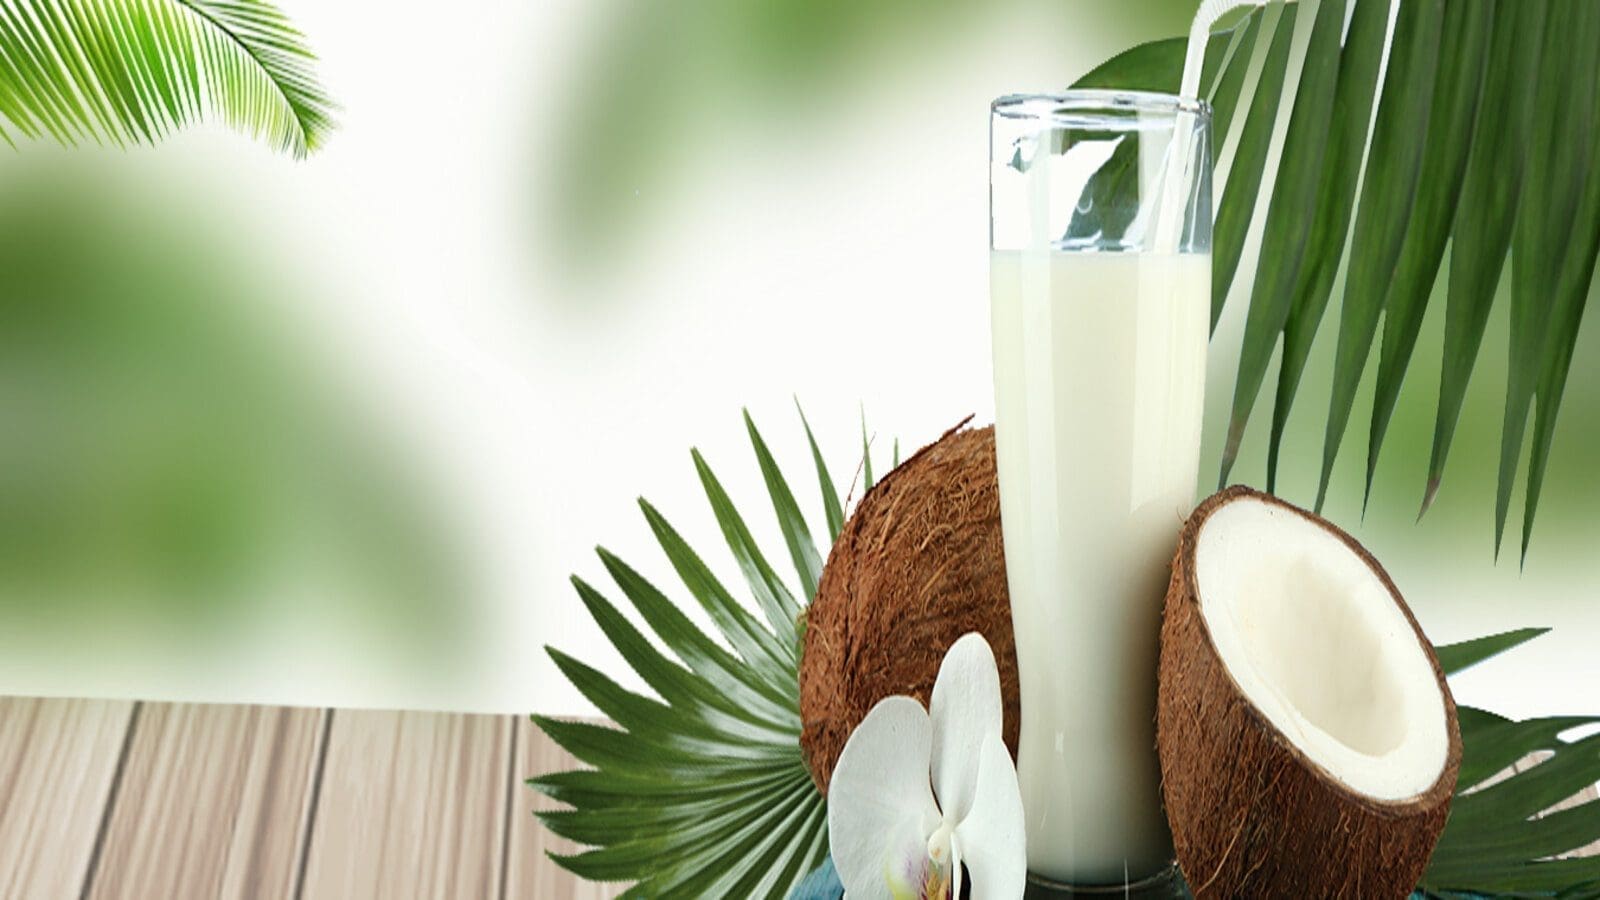 Private investor inject US$4.8m into construction of new coconut processing plant in Mozambique